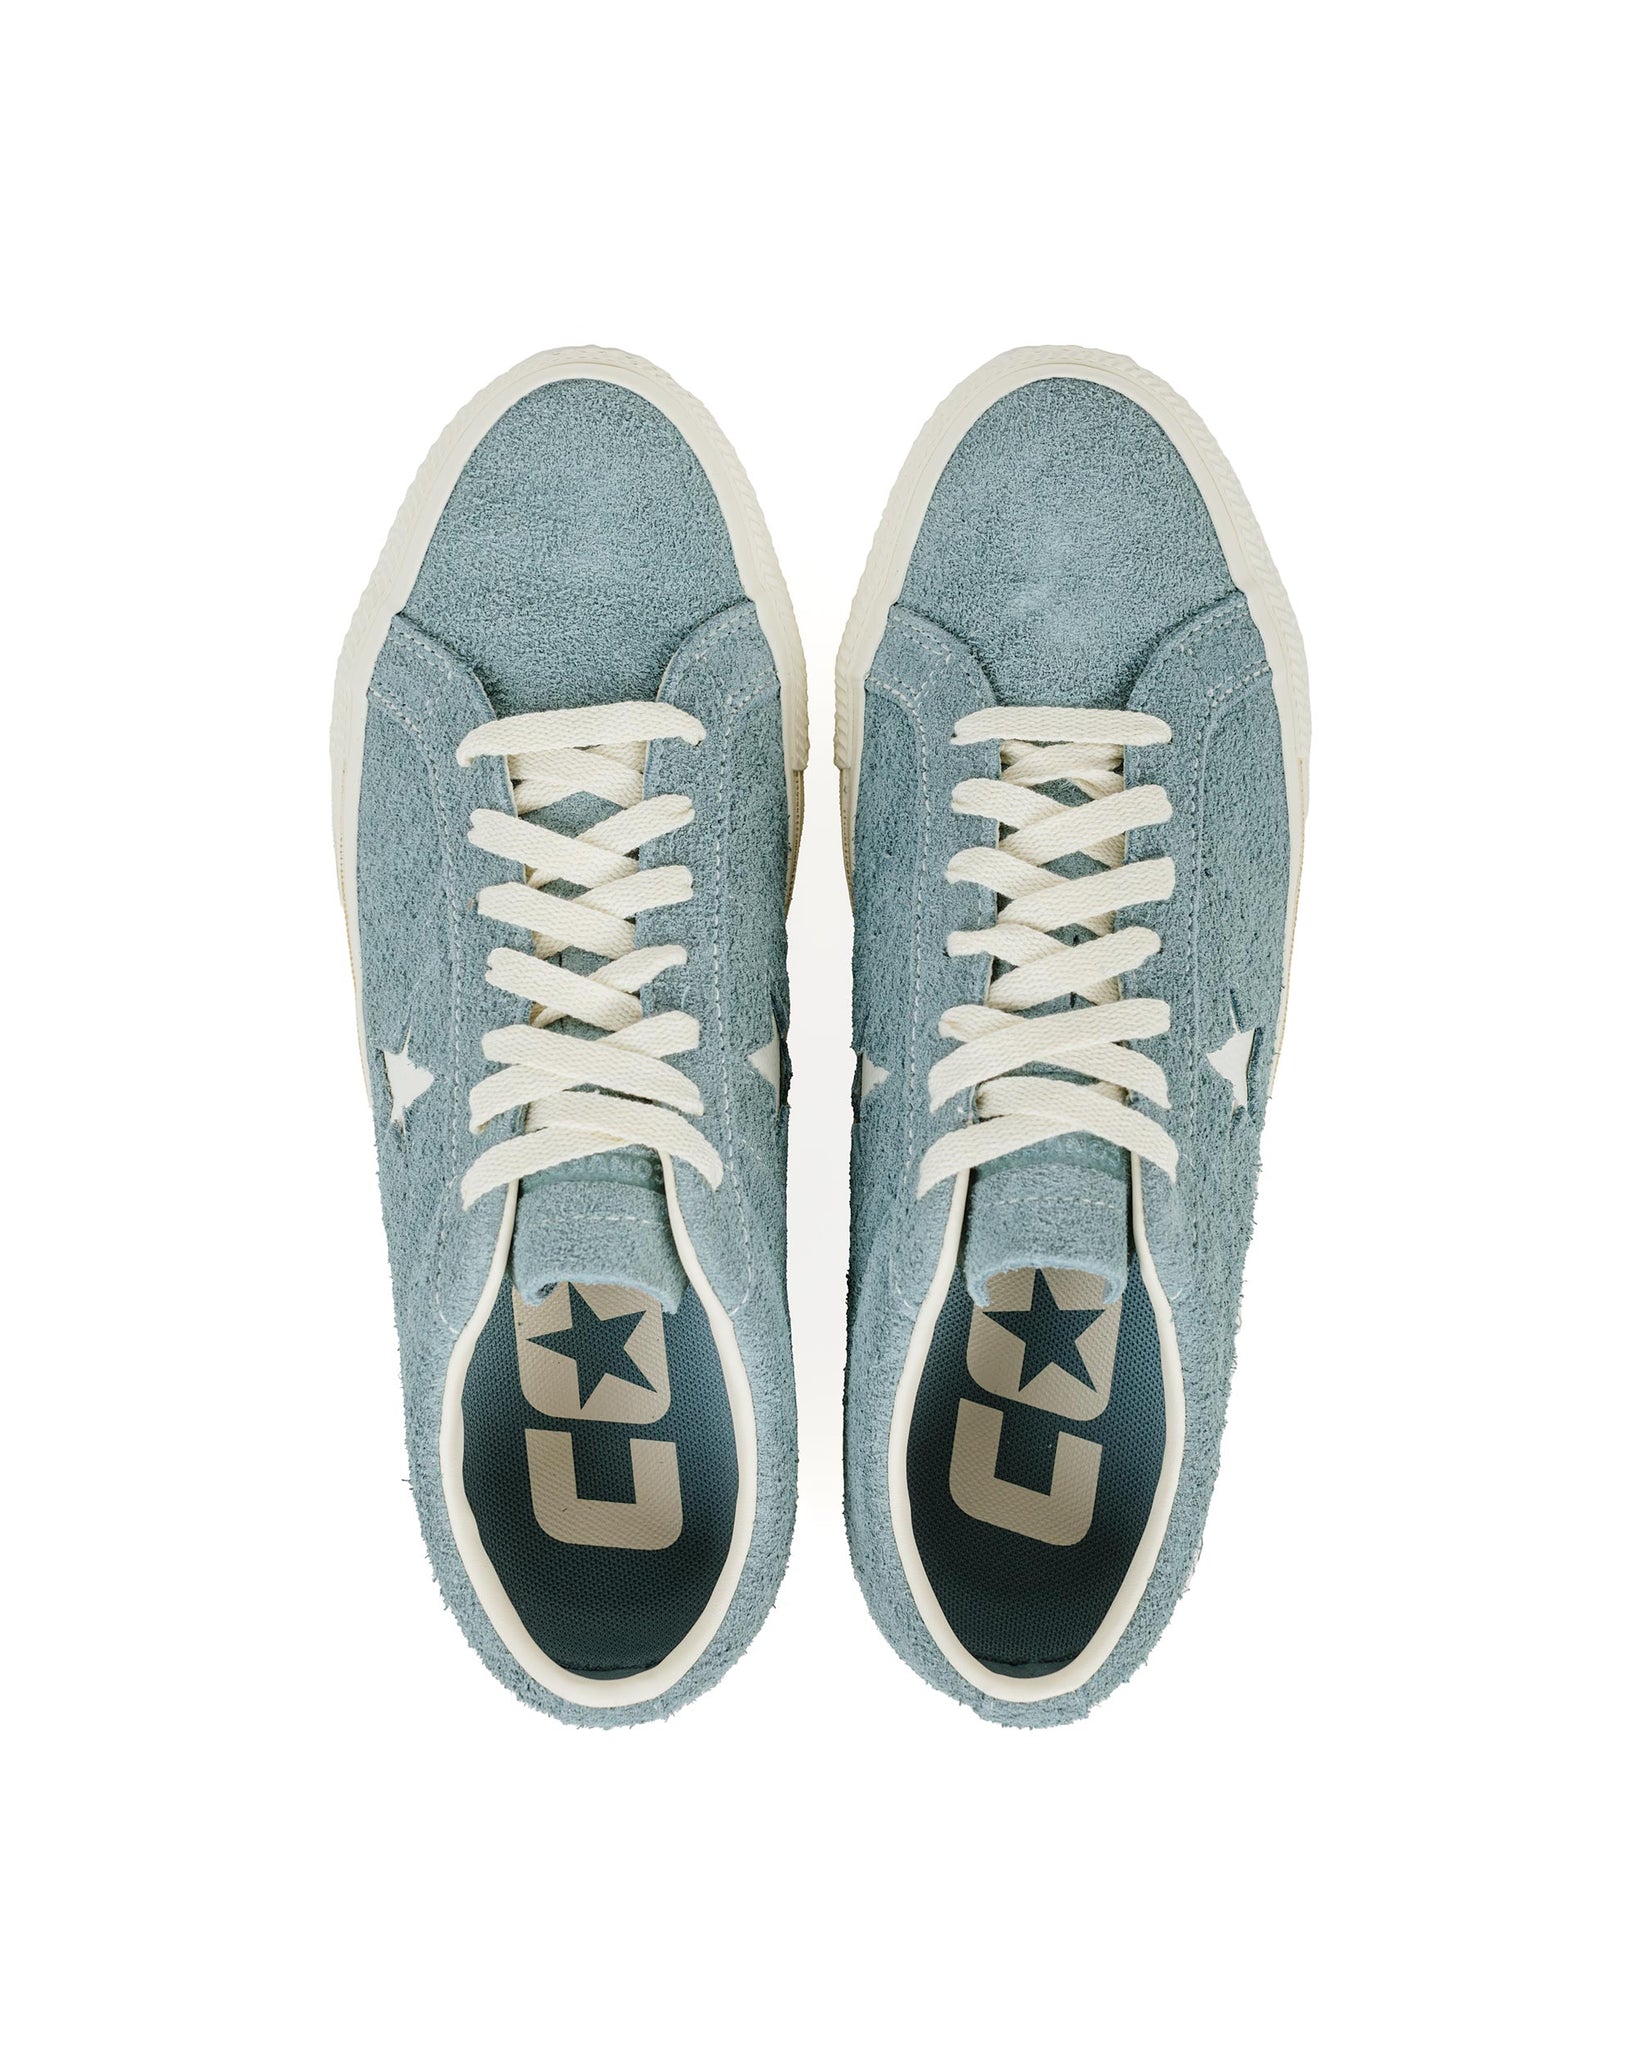 Converse One Star Pro Ox Cocoon Blue A06889C